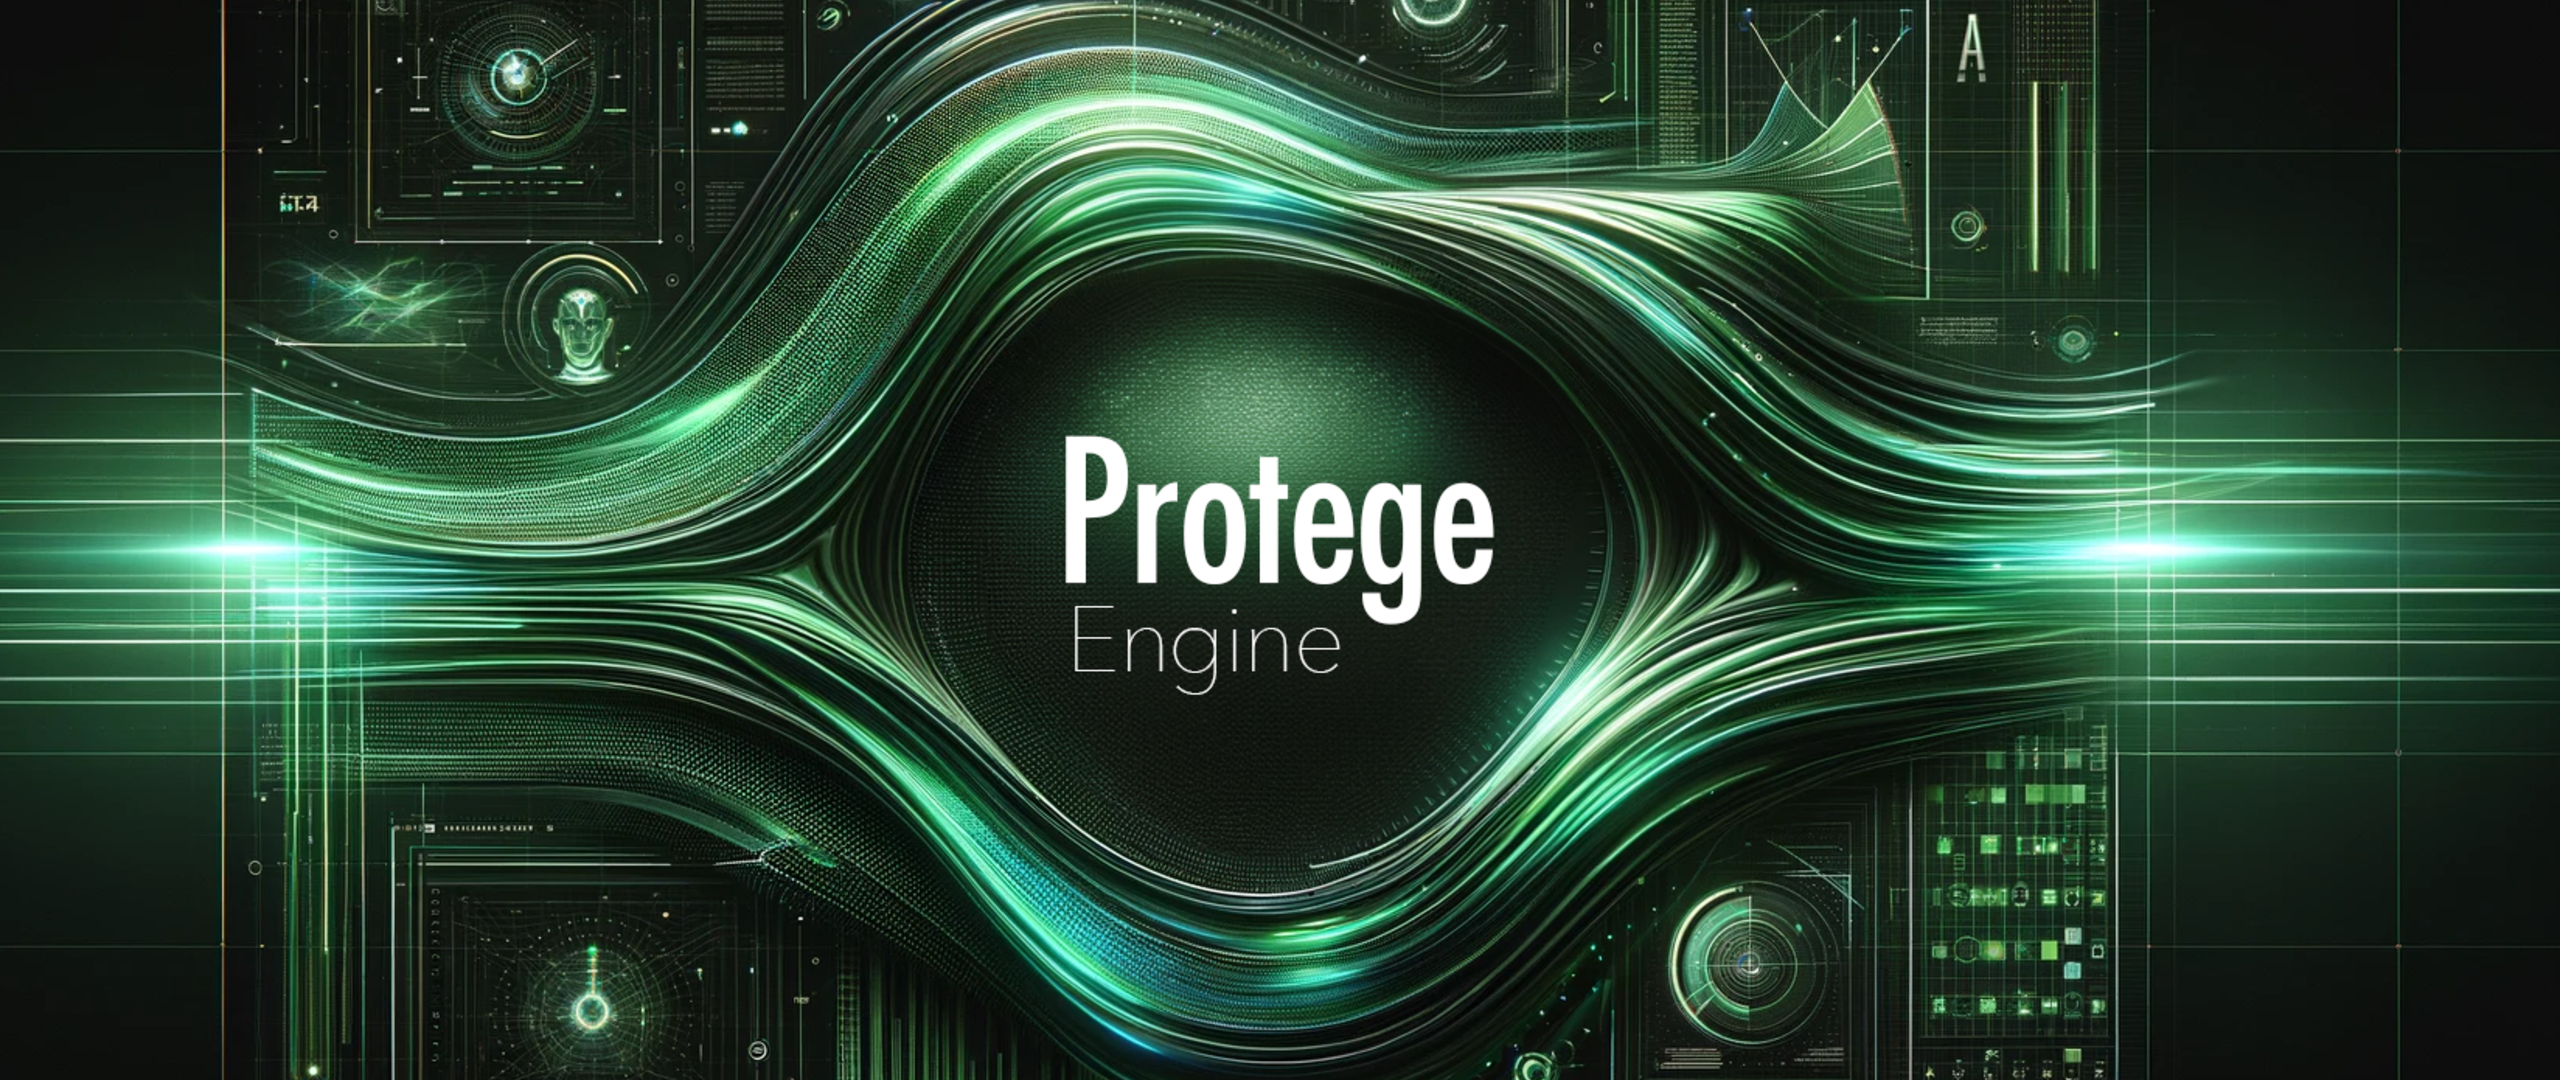 Cover Image for Protege Engine: Cost-Effective AI Through Human Experience